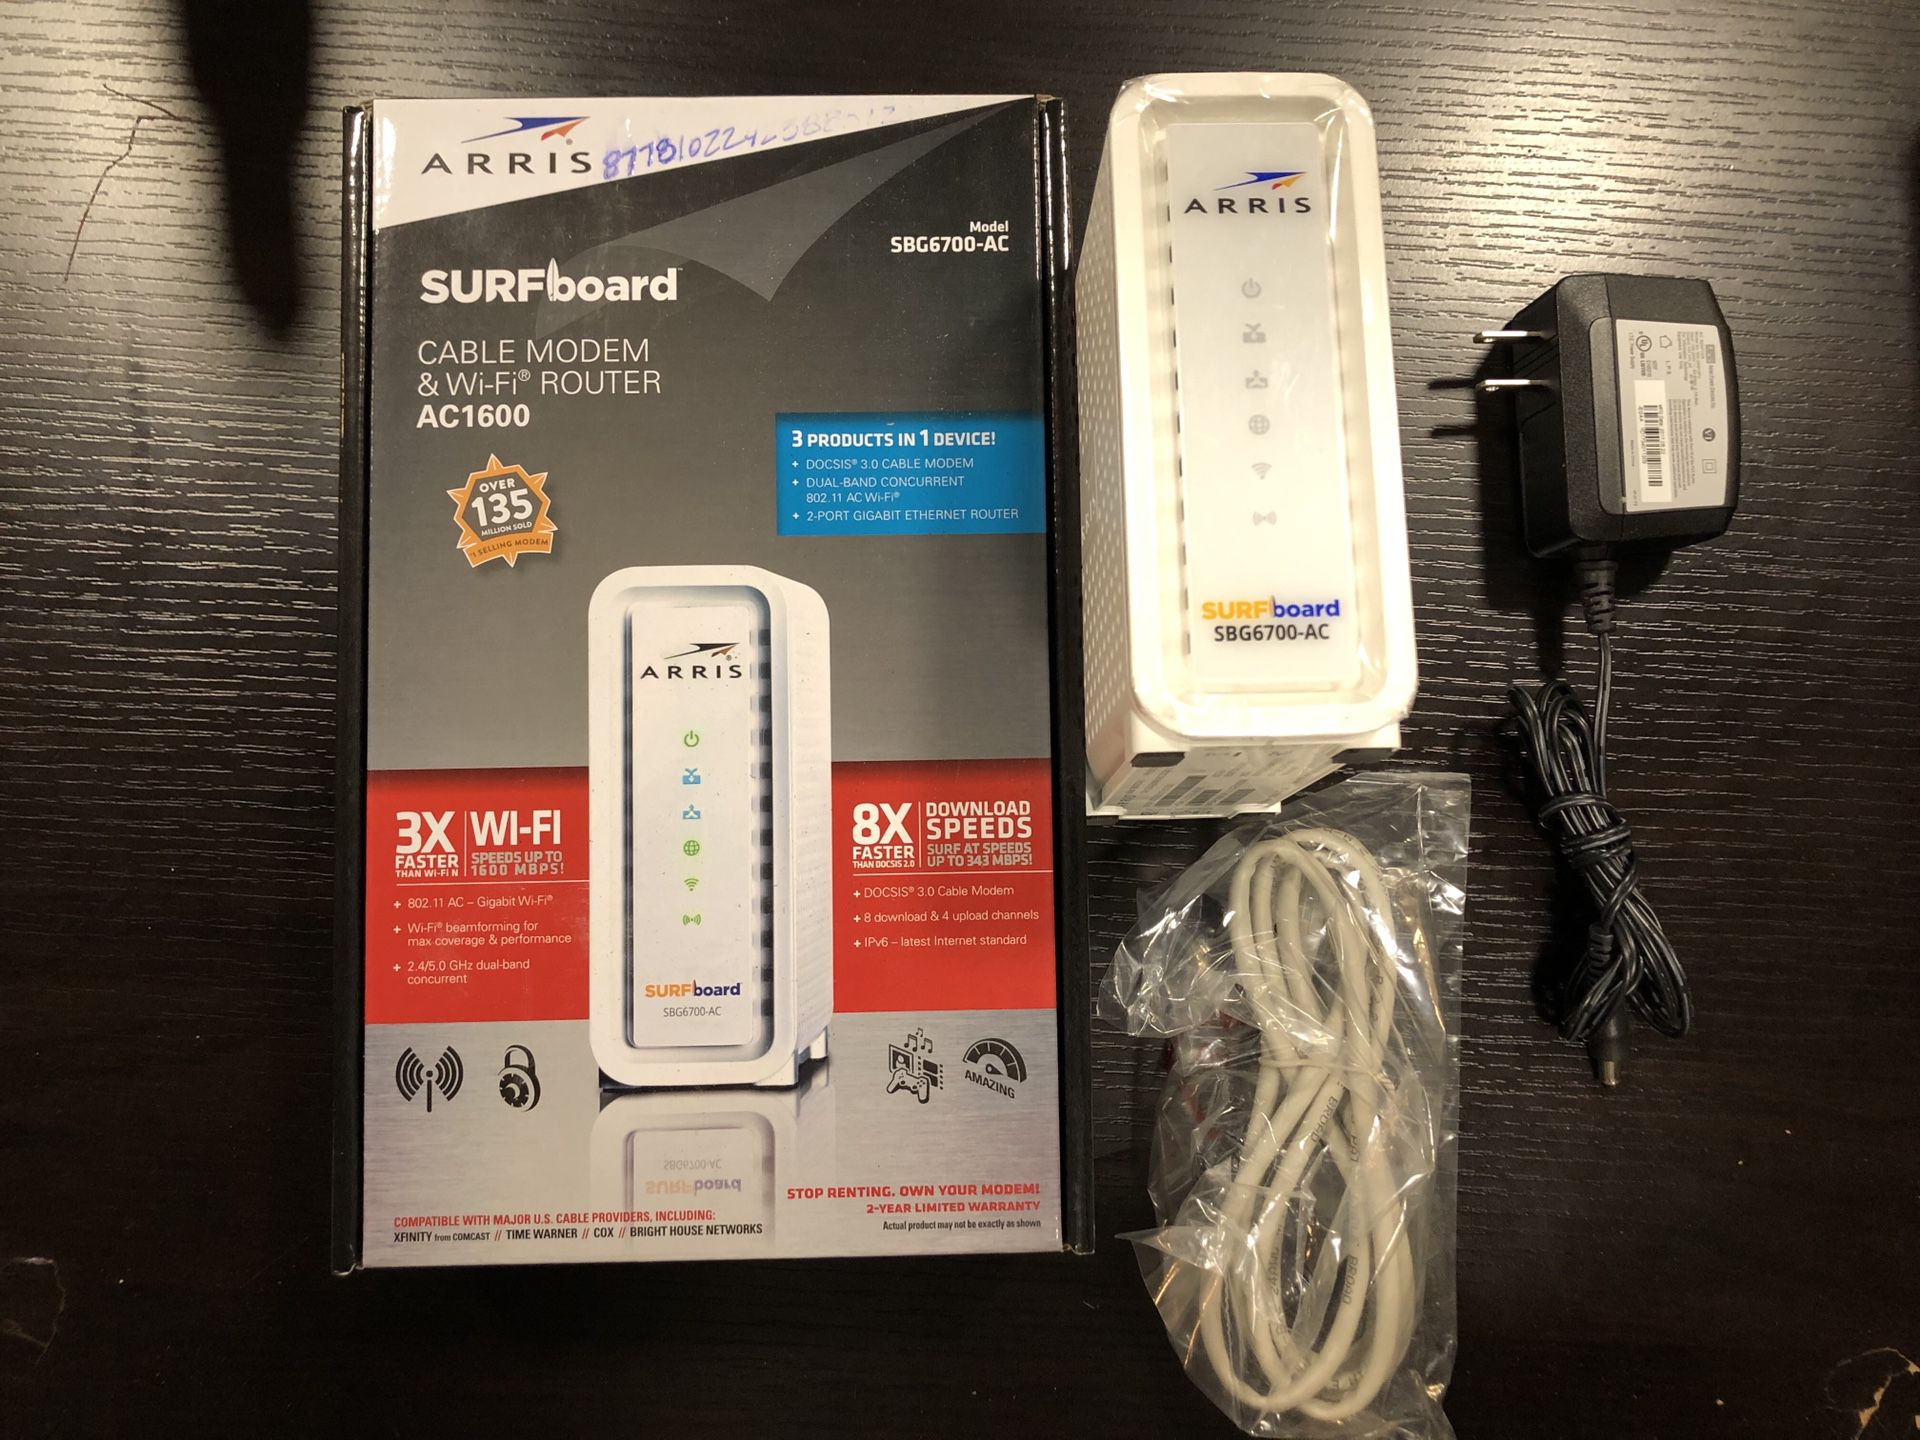 Arris AC1600 Cable Modem & WiFi Router SBG6700